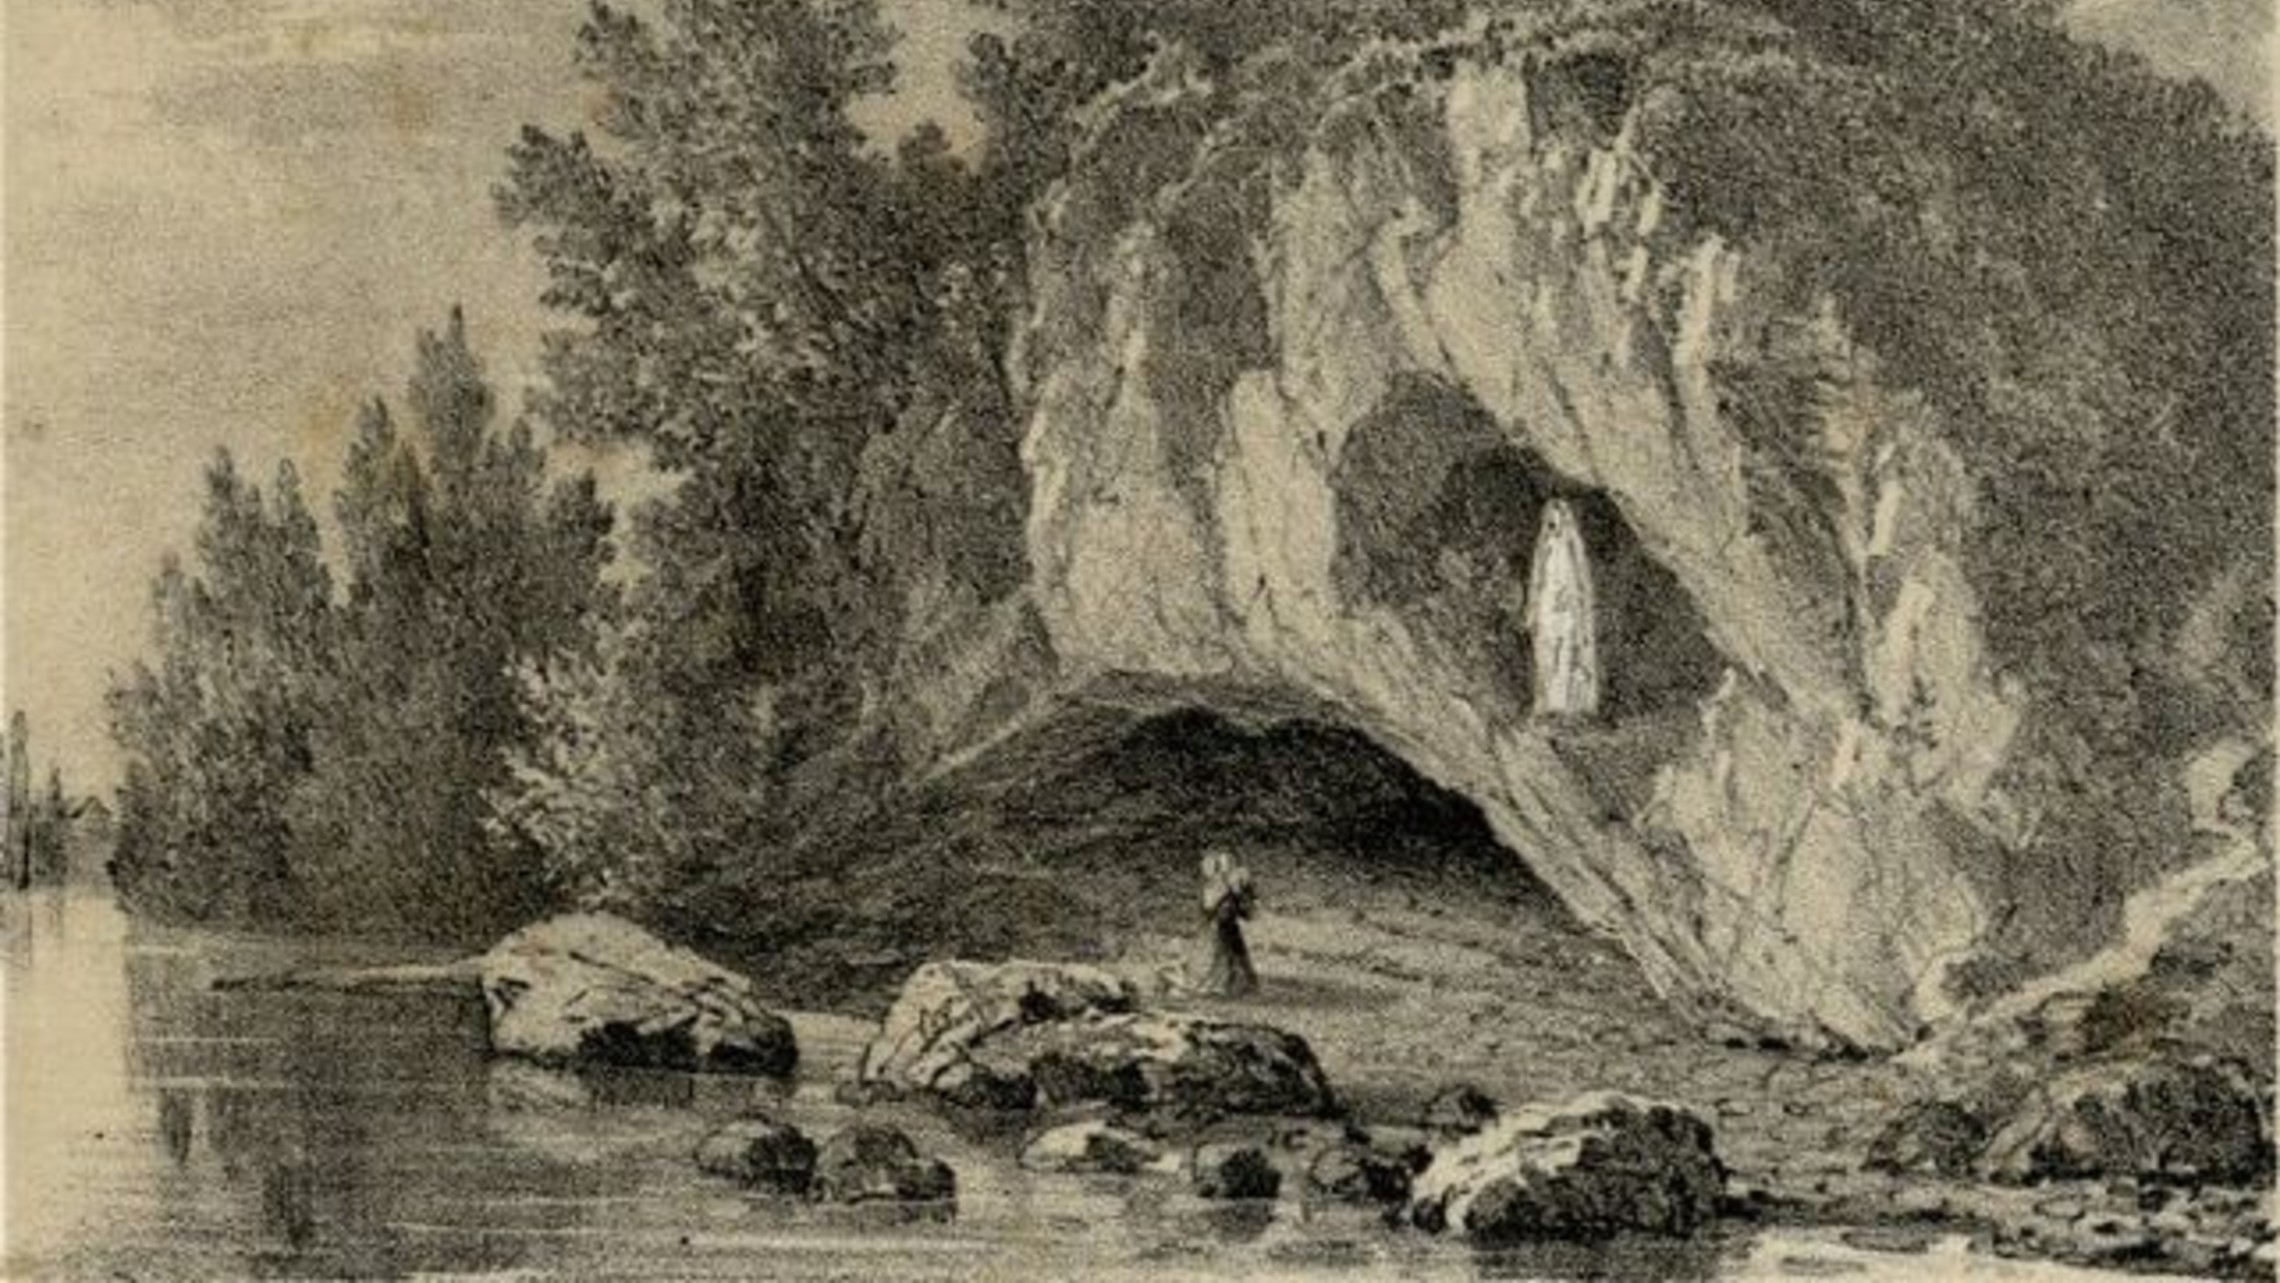 pencil sketch of the Gave River, Massaibelle cliff, and grotto